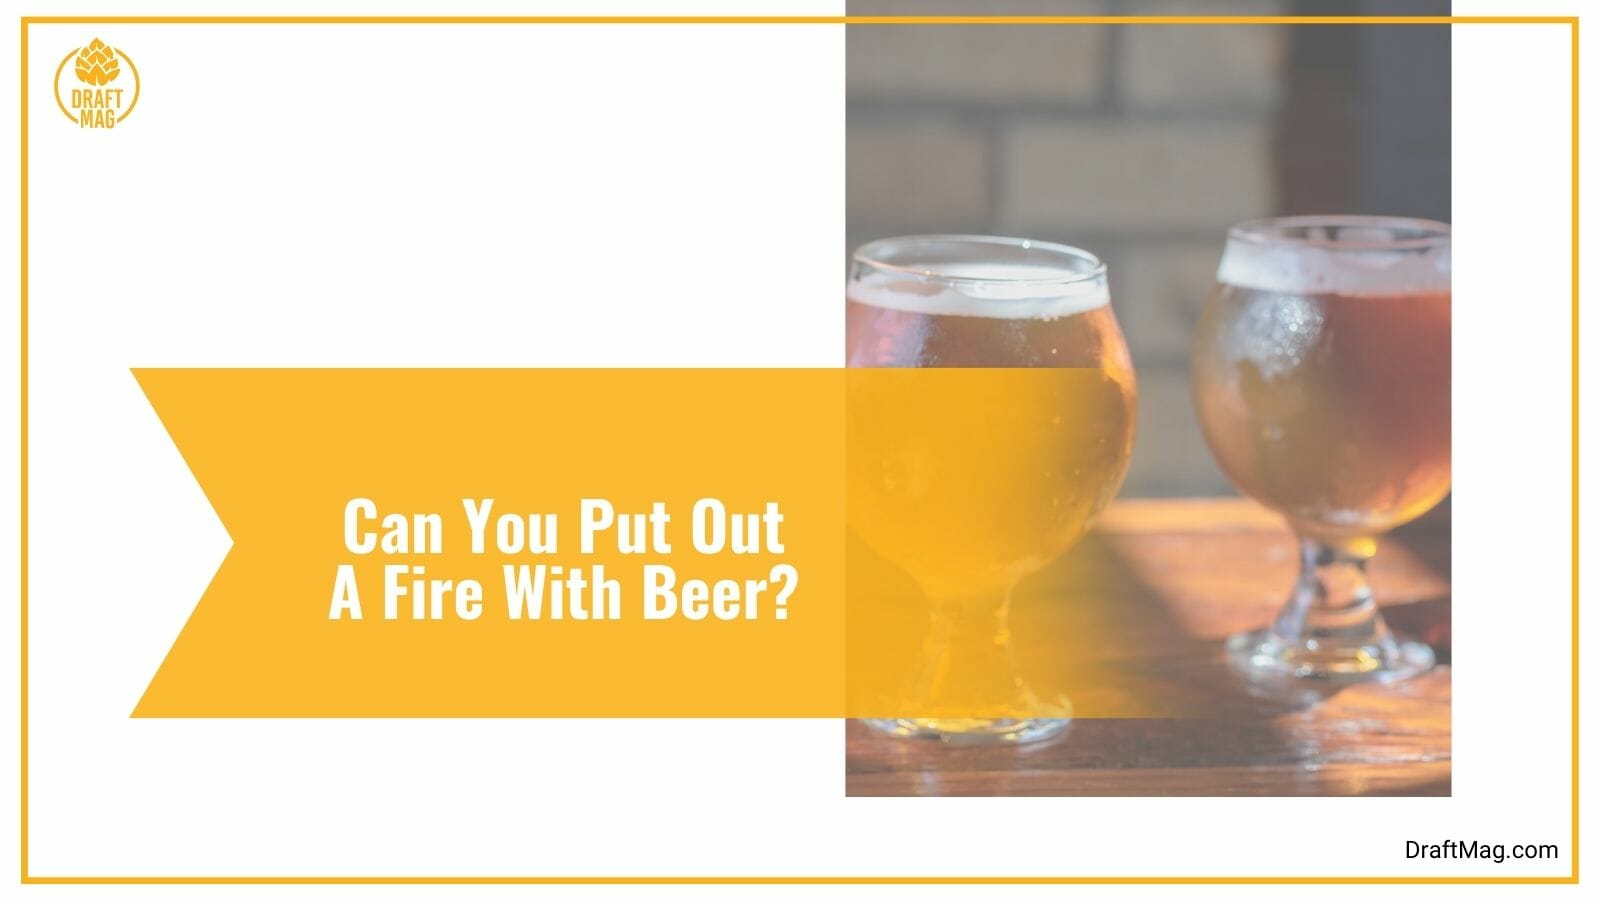 Can You Put Out a Fire With Beer